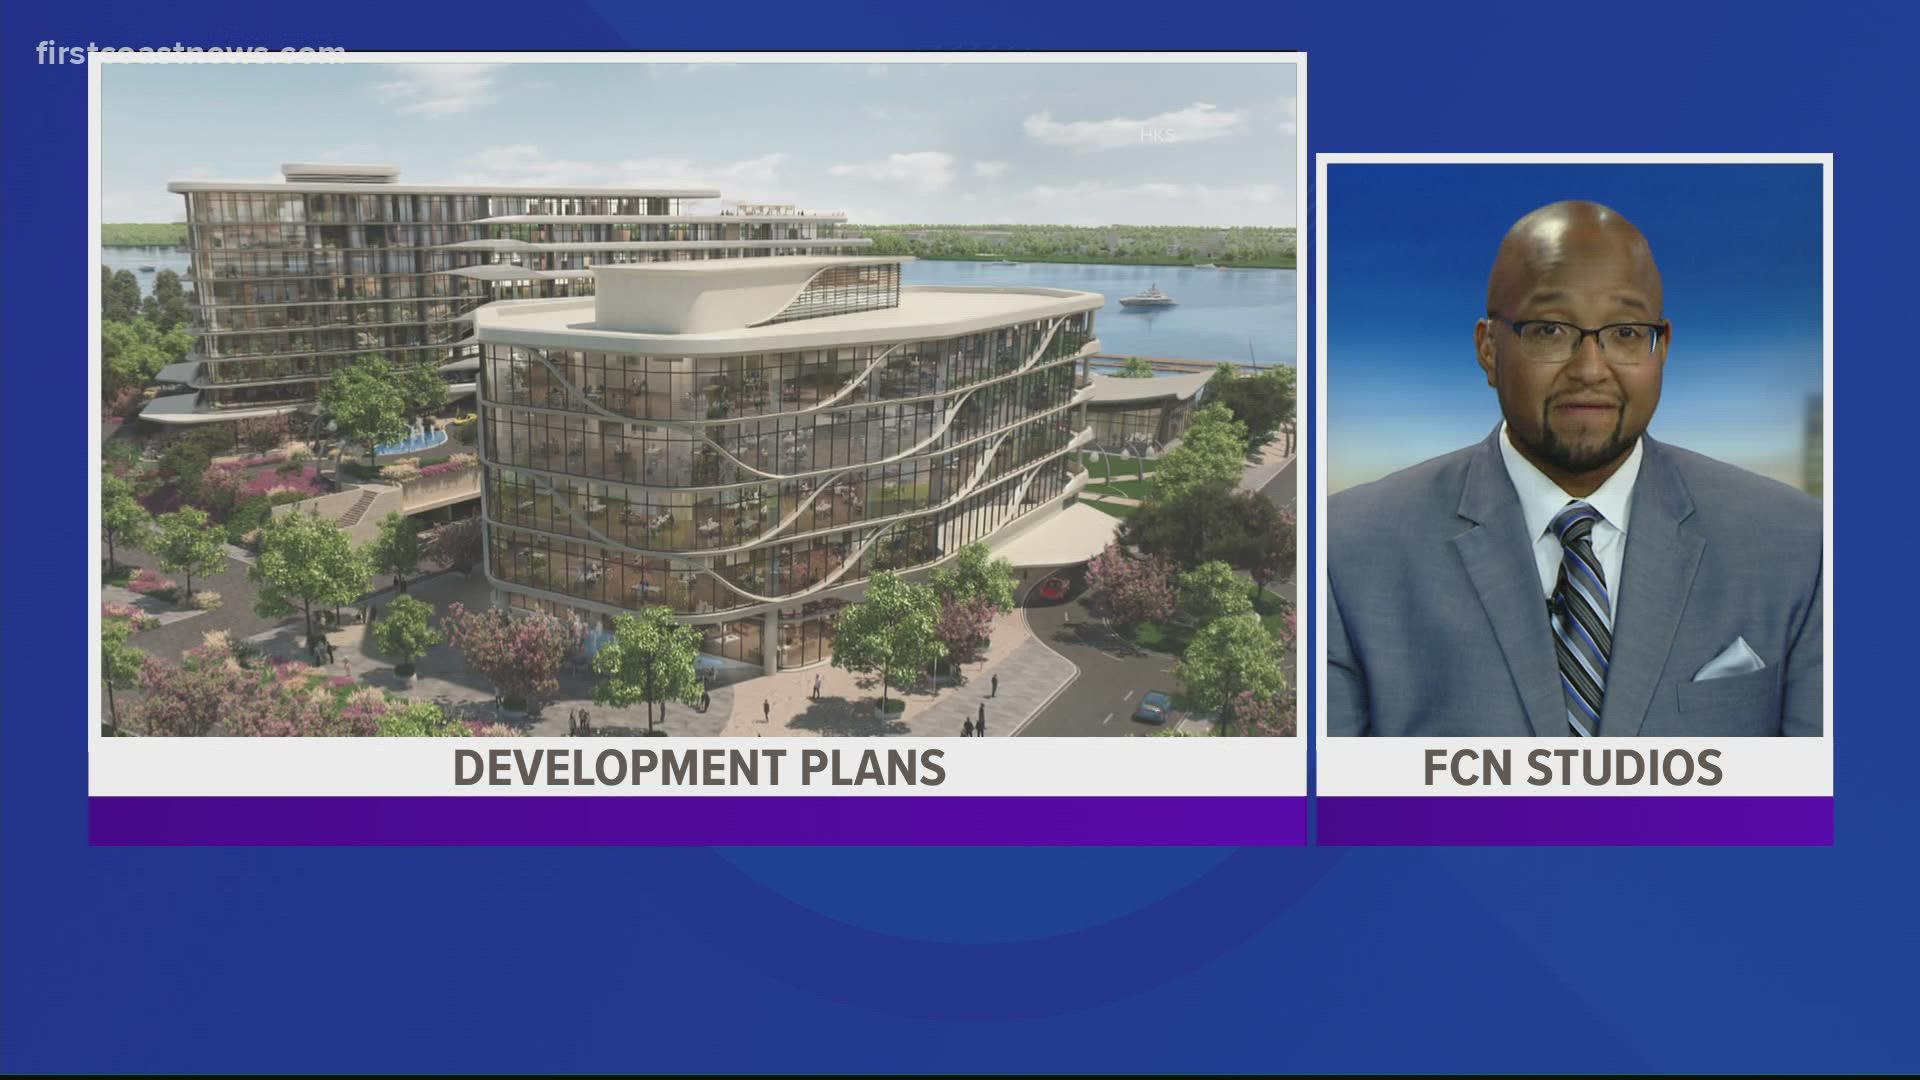 The plan includes a Four Seasons hotel, marina improvements and a new Jaguars training facility.